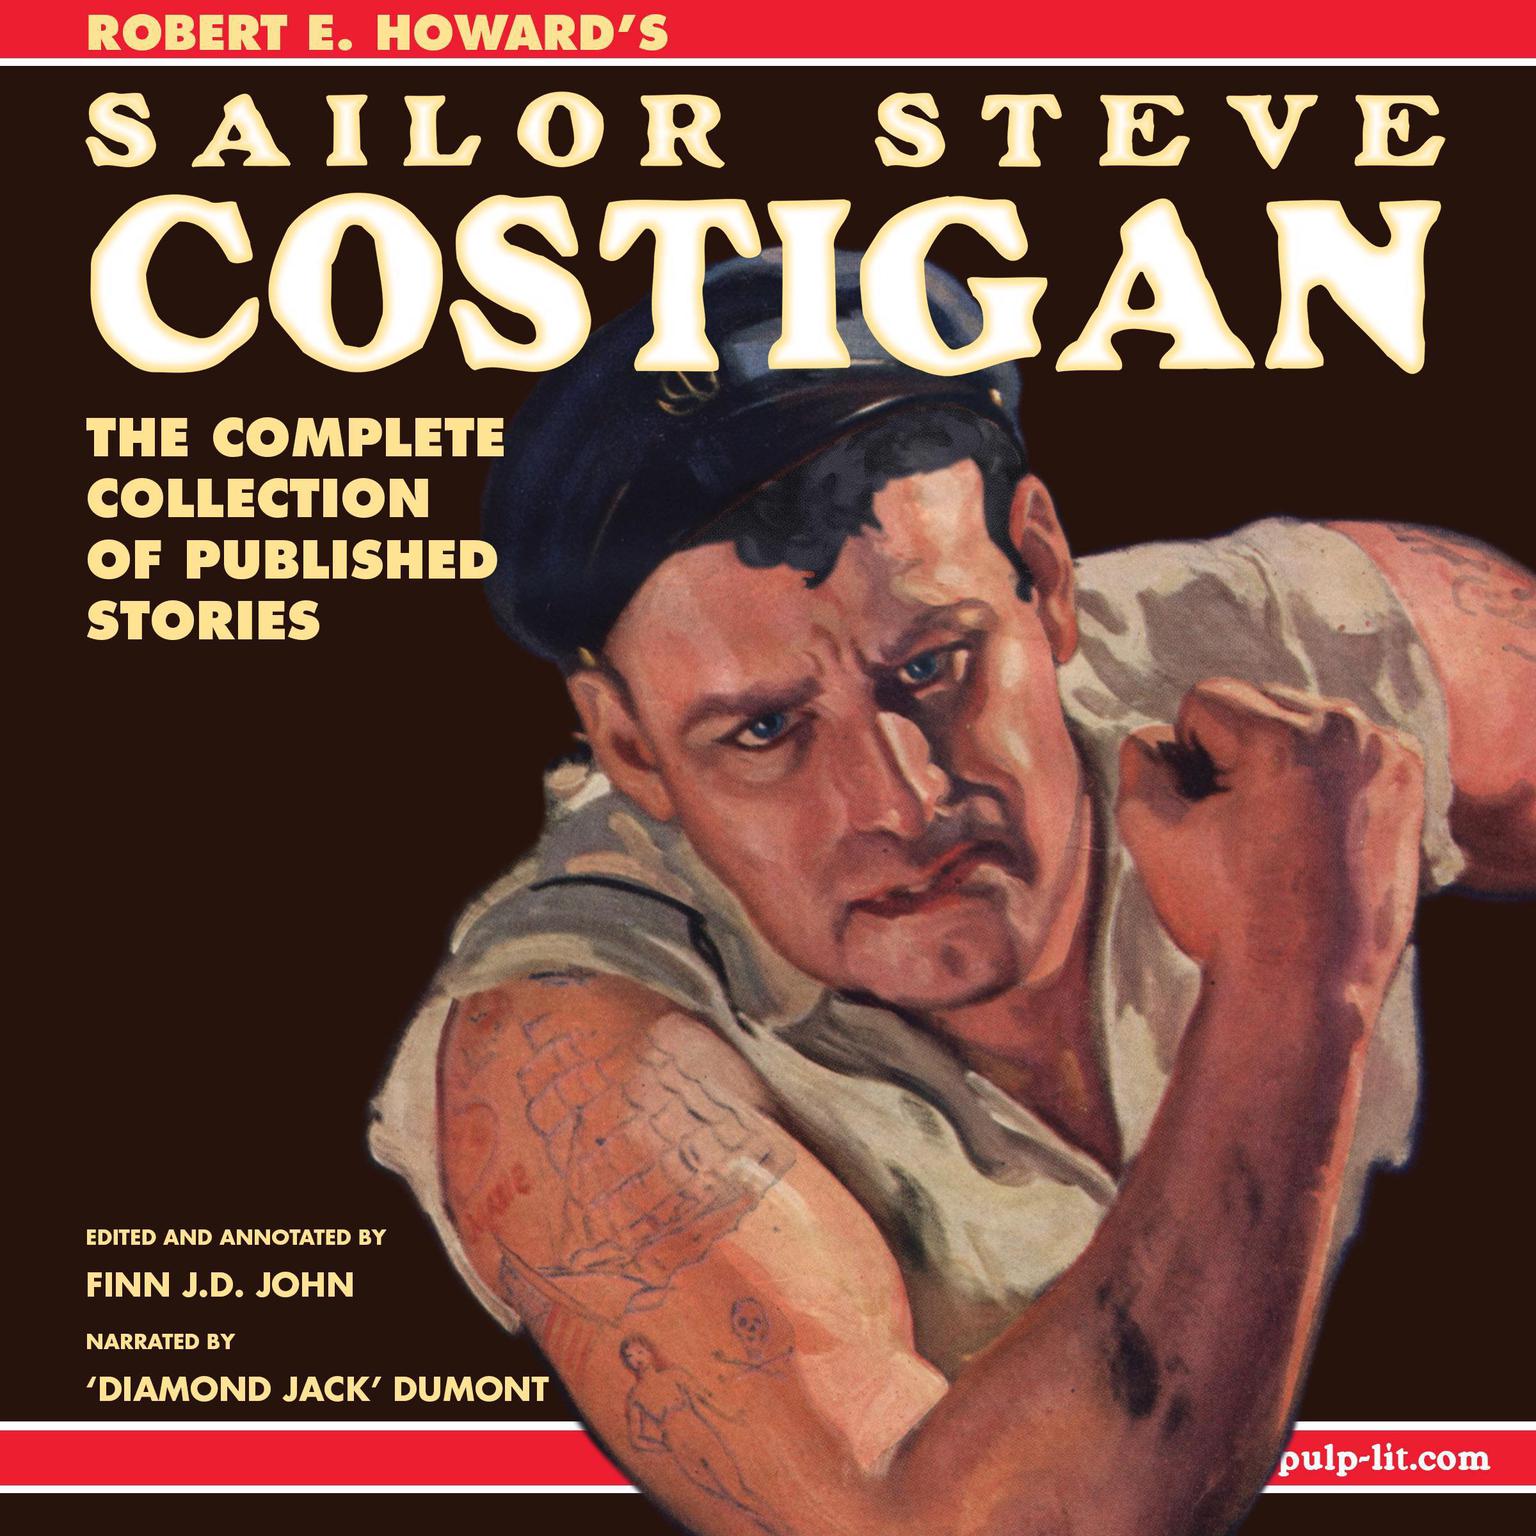 Robert E. Howard’s Sailor Steve Costigan: The Complete Collection of Published Stories Audiobook, by Robert E. Howard